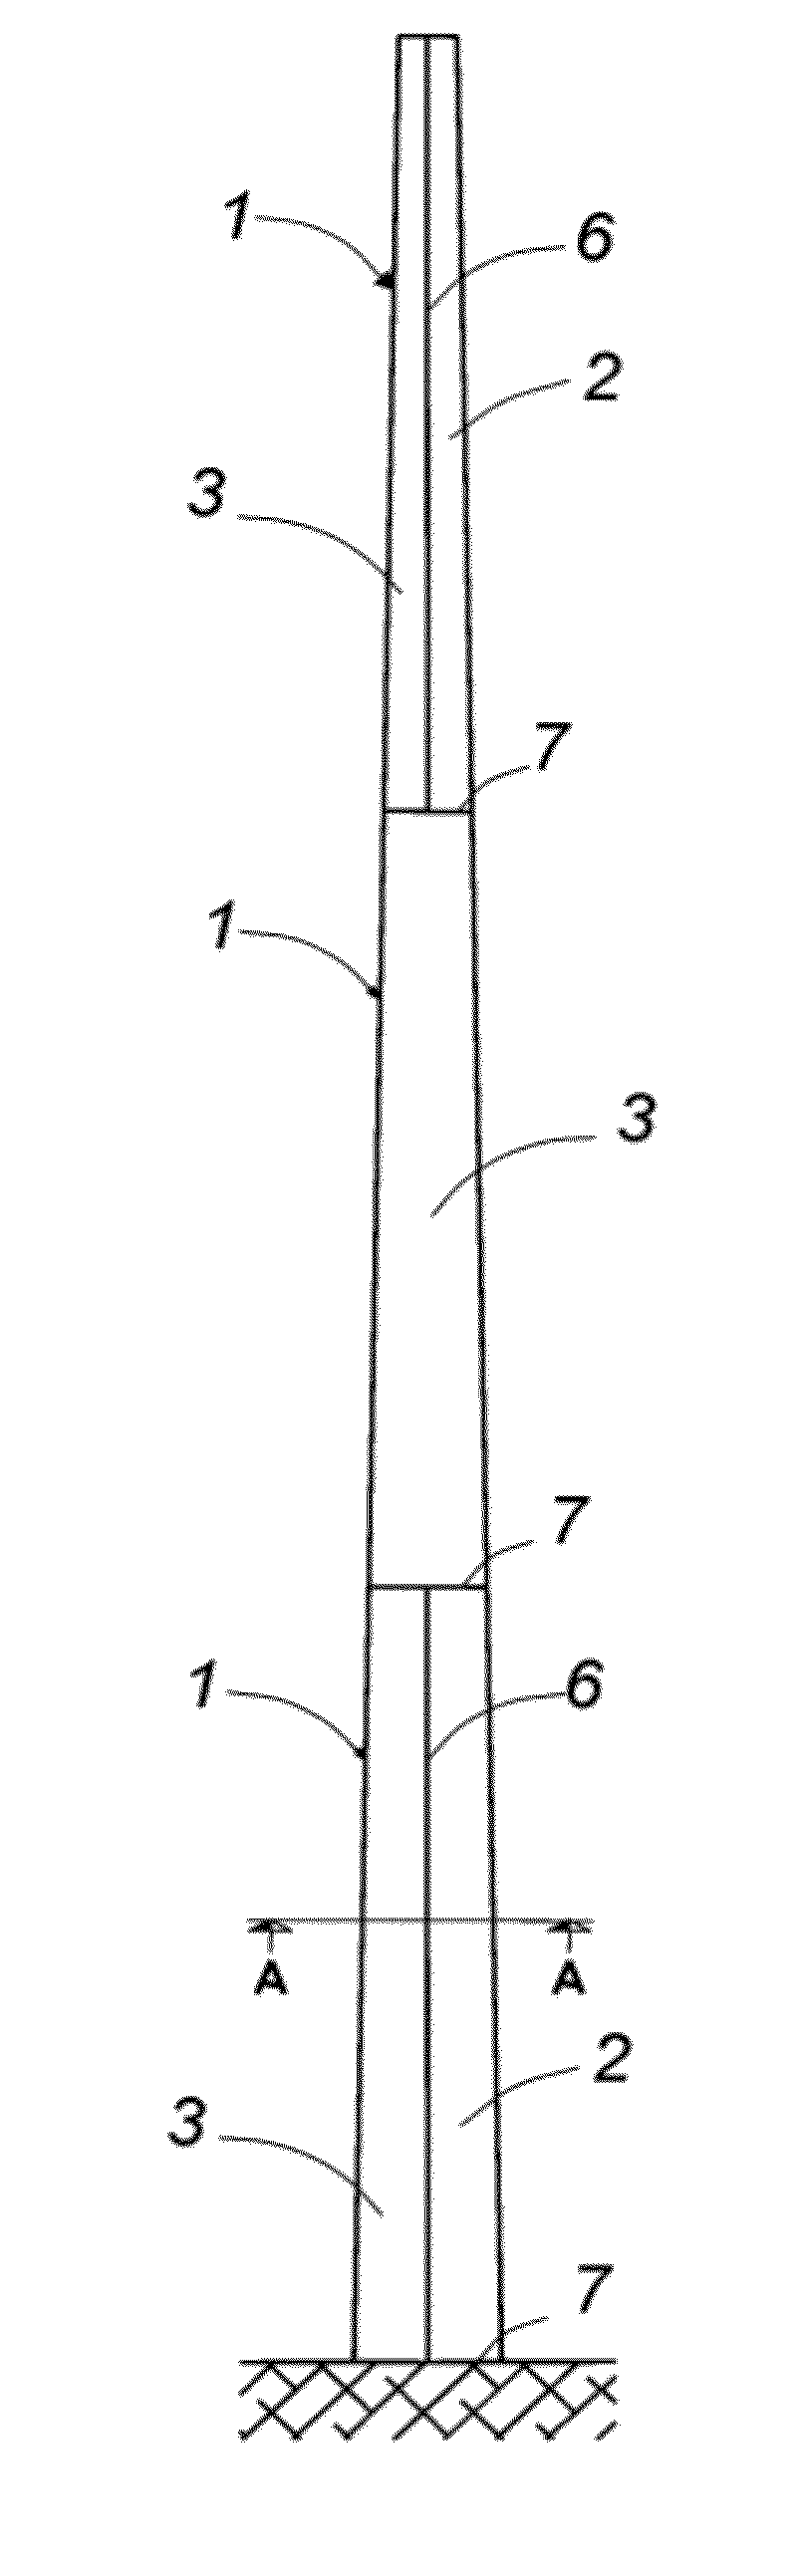 Support structure for a wind turbine and procedure to erect the support structure